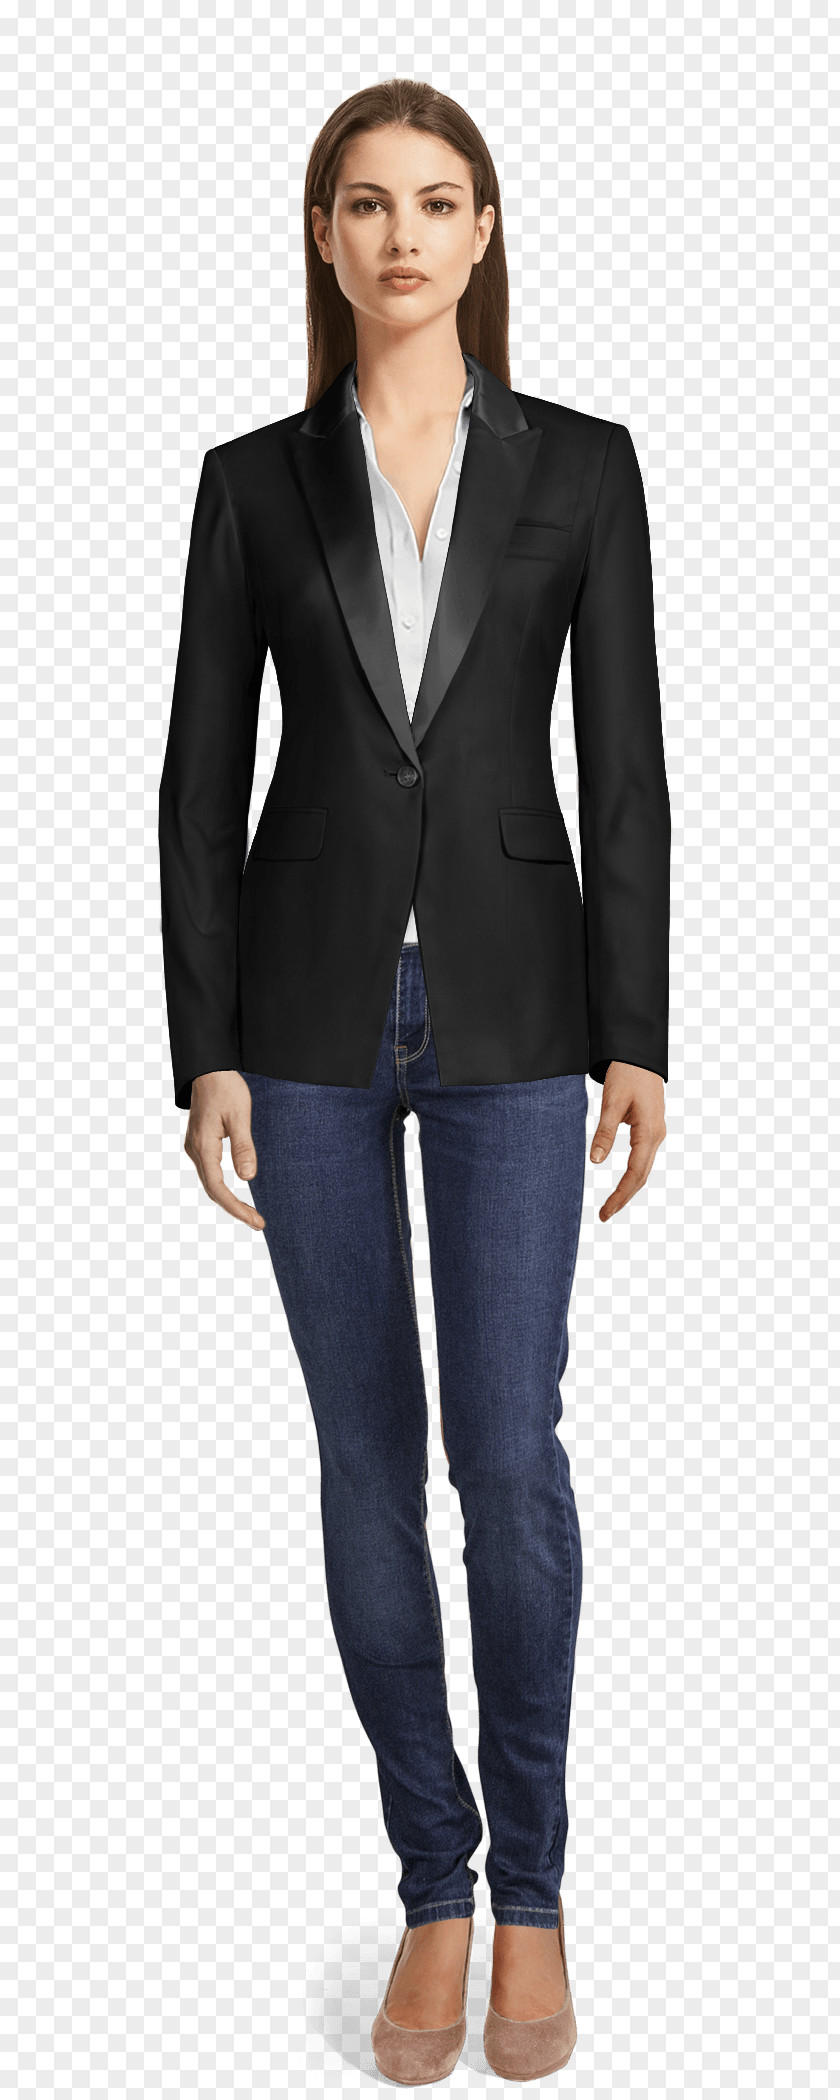 WOMEN SUIT Pant Suits Clothing Blazer Double-breasted PNG